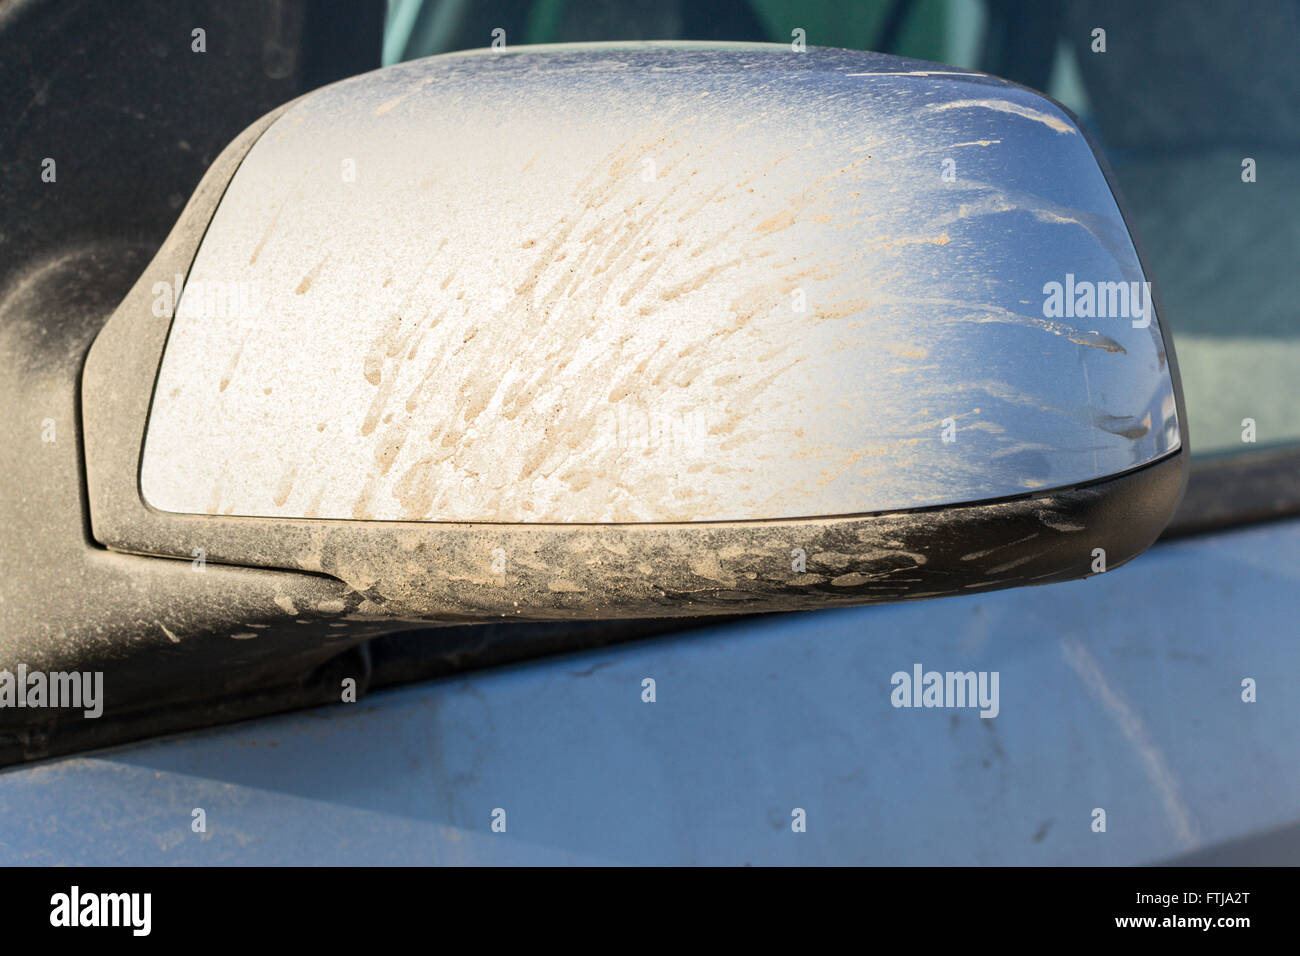 Mud stained car wing mirror in blue metallic paint with dry mud stains and streaks. Stock Photo